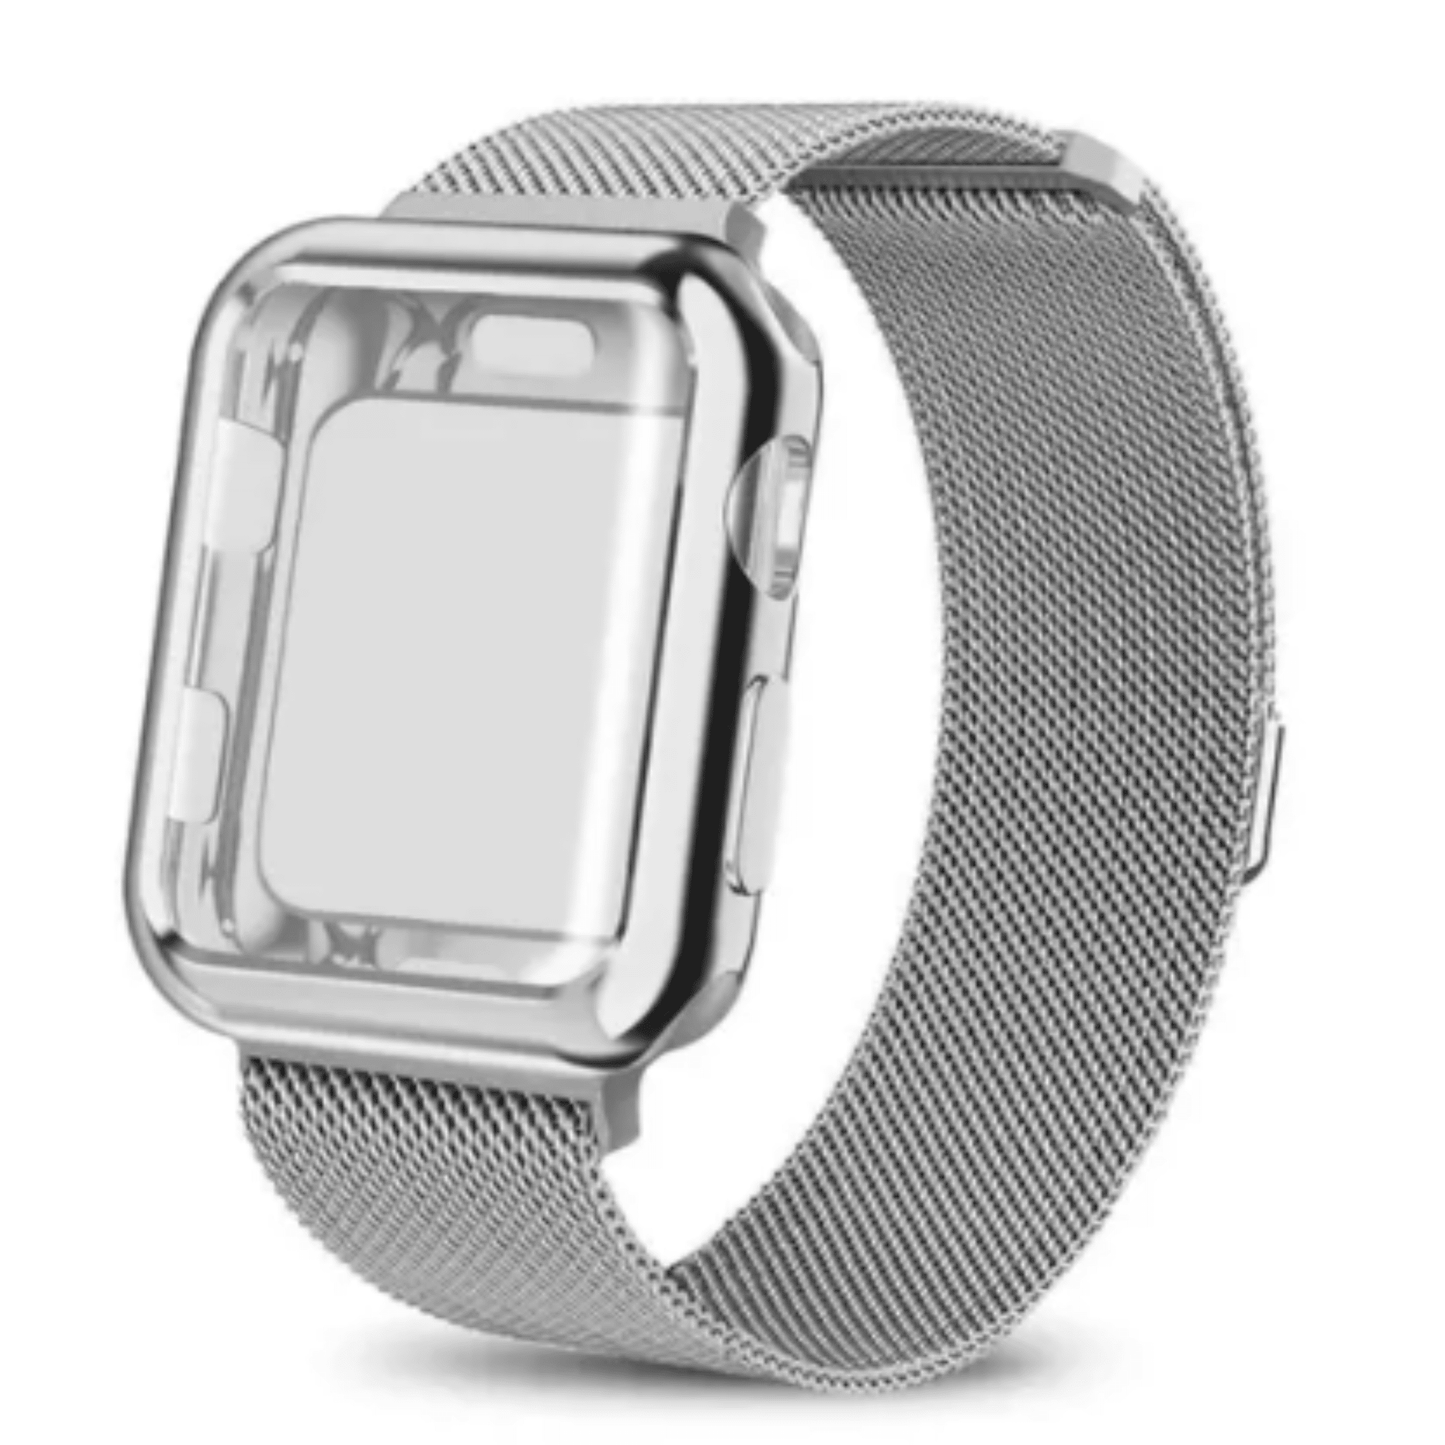 Mesh Milanese Wrist Band Loop W/ Screen Protector Bumper Case For Apple Watch Silver Band & Silver Case Watch Band and Cover Combo Watch Bands Elements Watches